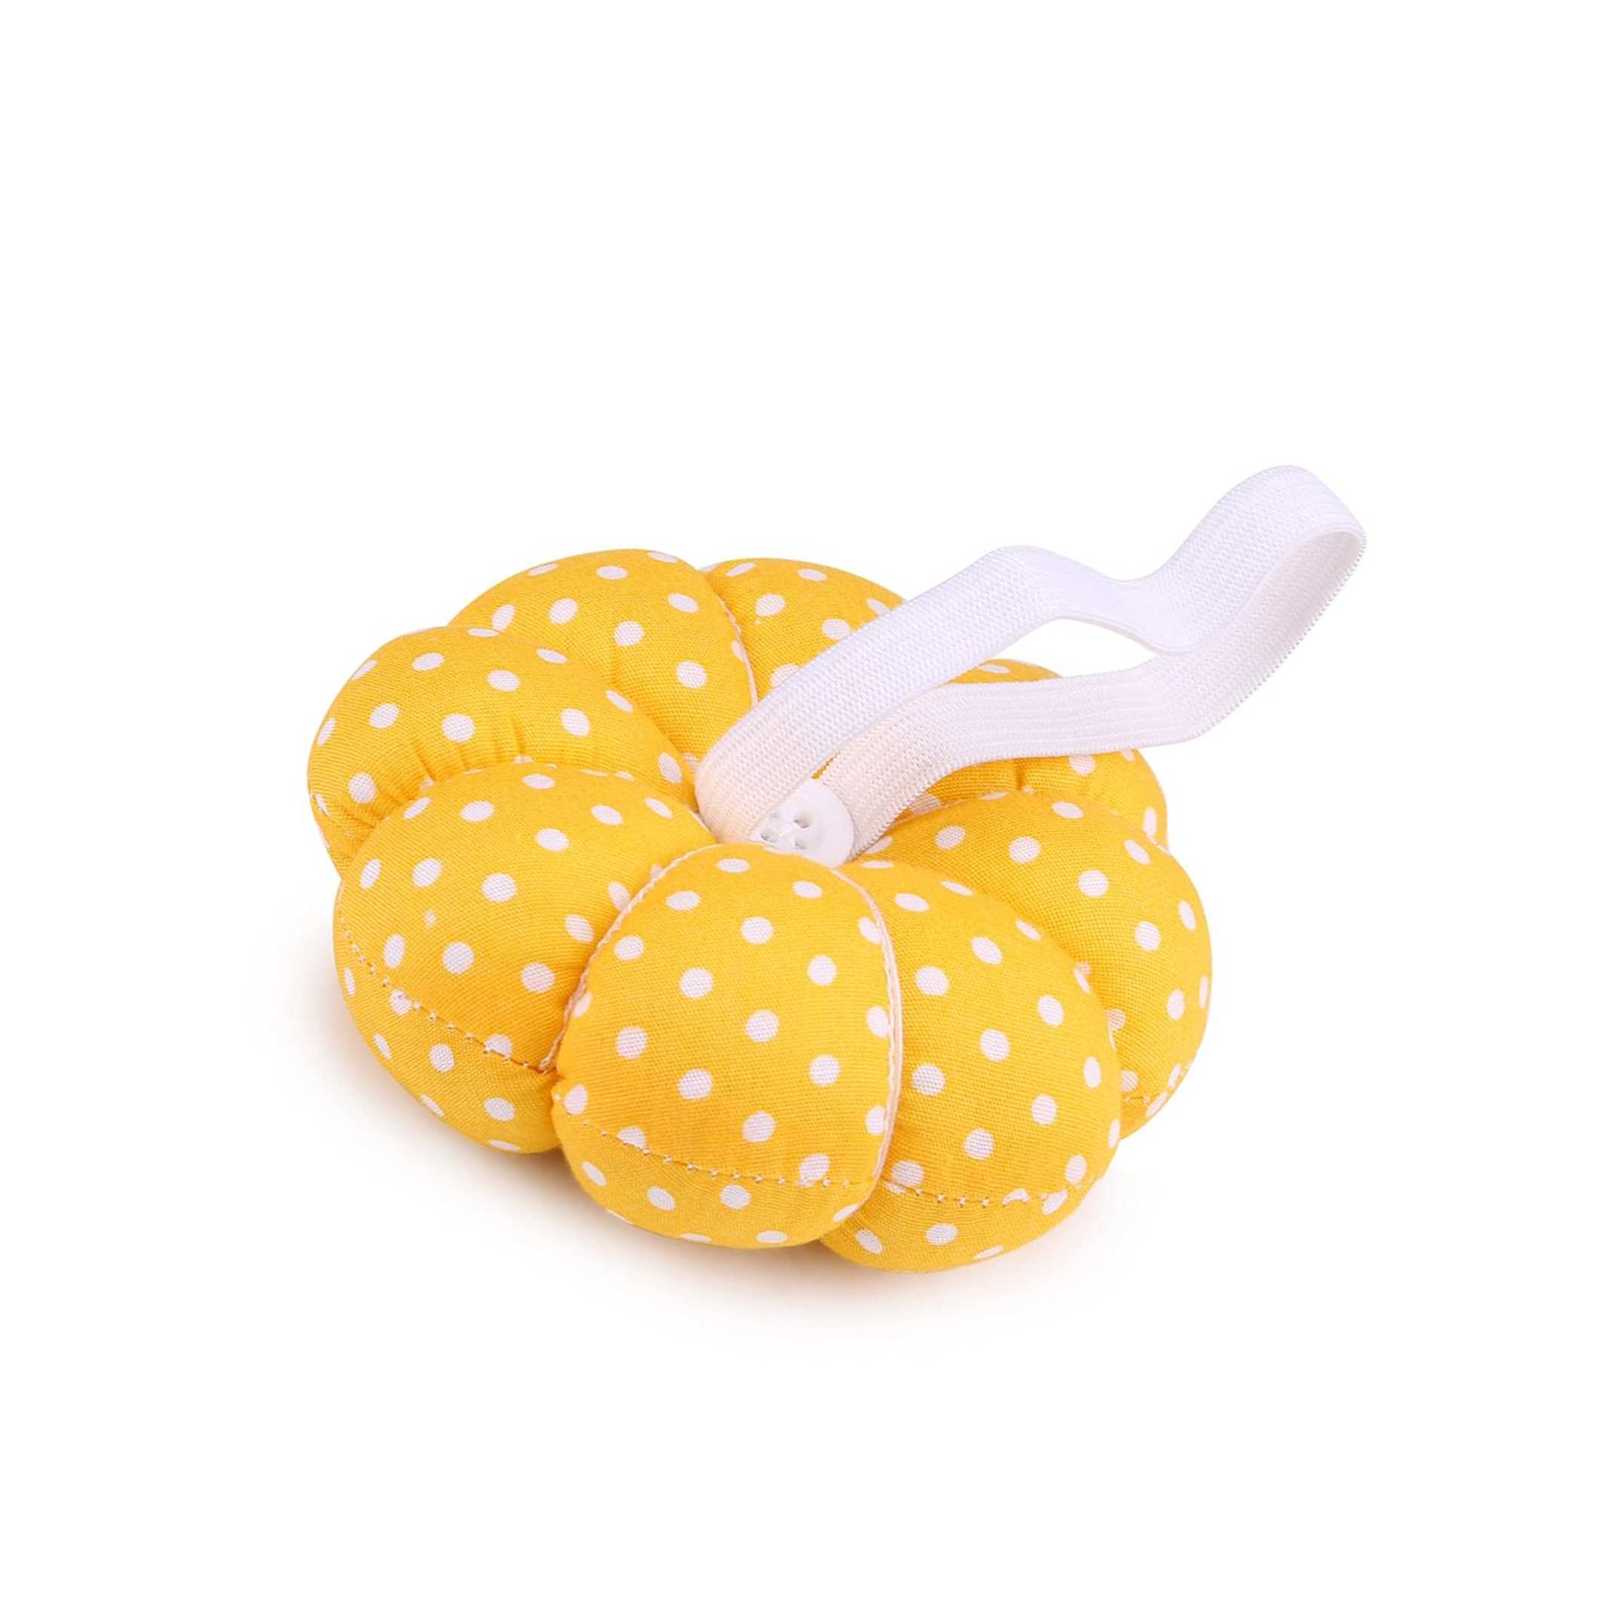 Wrist Pin Cushion, Kin Wearable Pin Cushions With Elastic For Sewing Work, Po